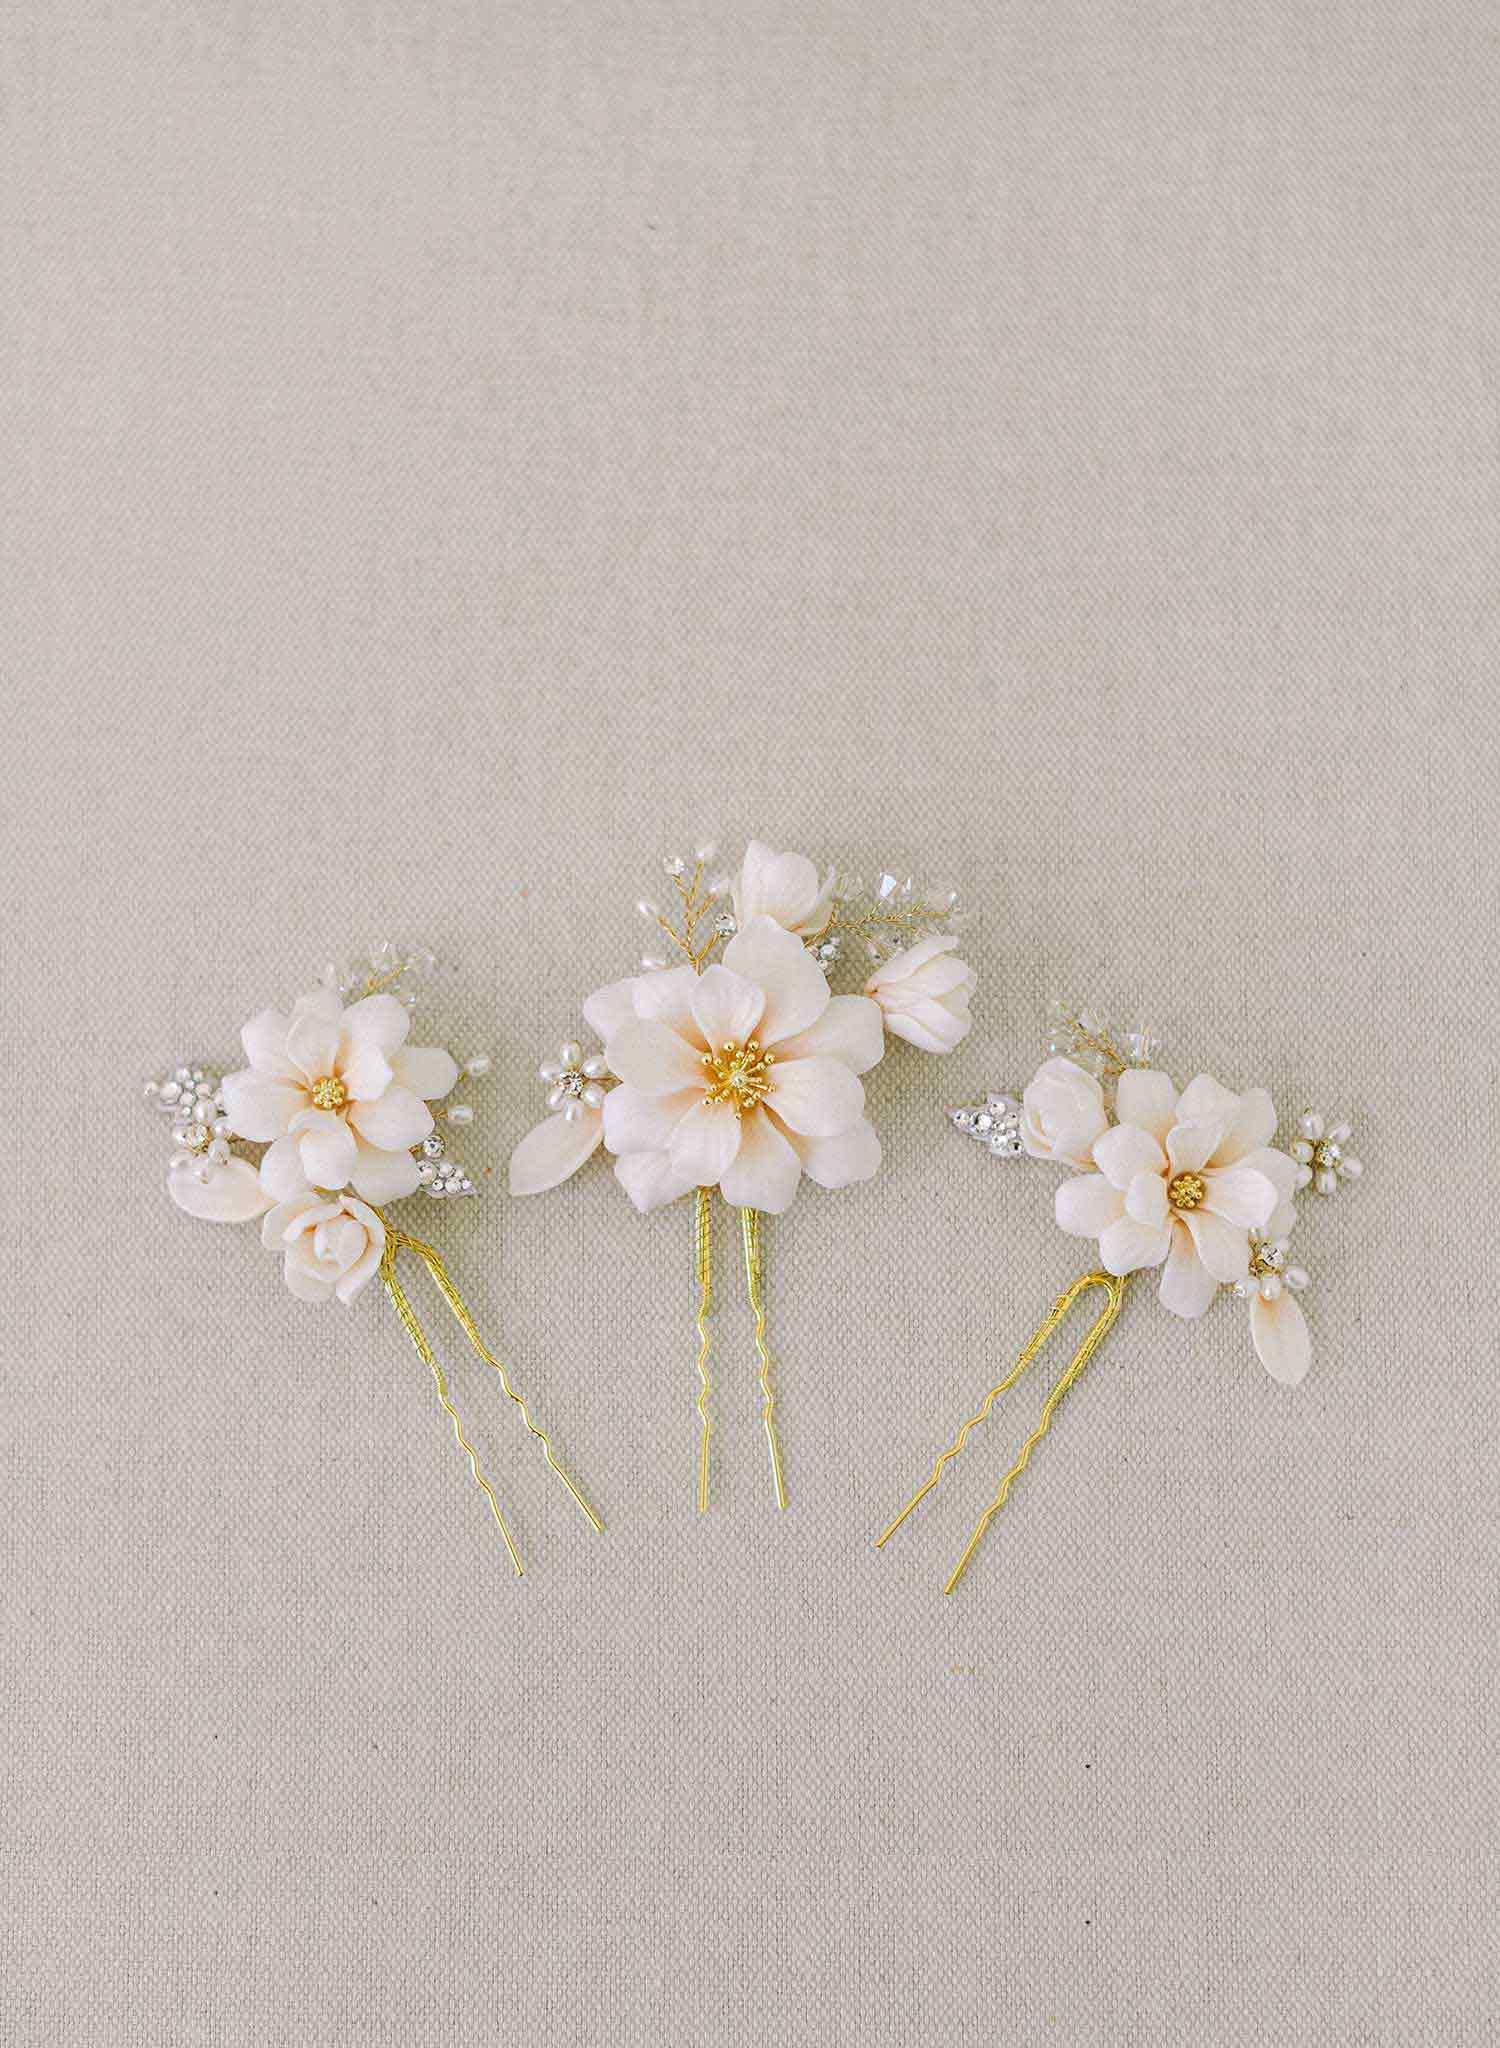 Twigs & Honey Bridal Hair Pins, Flower Pins - Magnolia Blooms Pin Set of 3 - Style #2320 Ivory/Gold